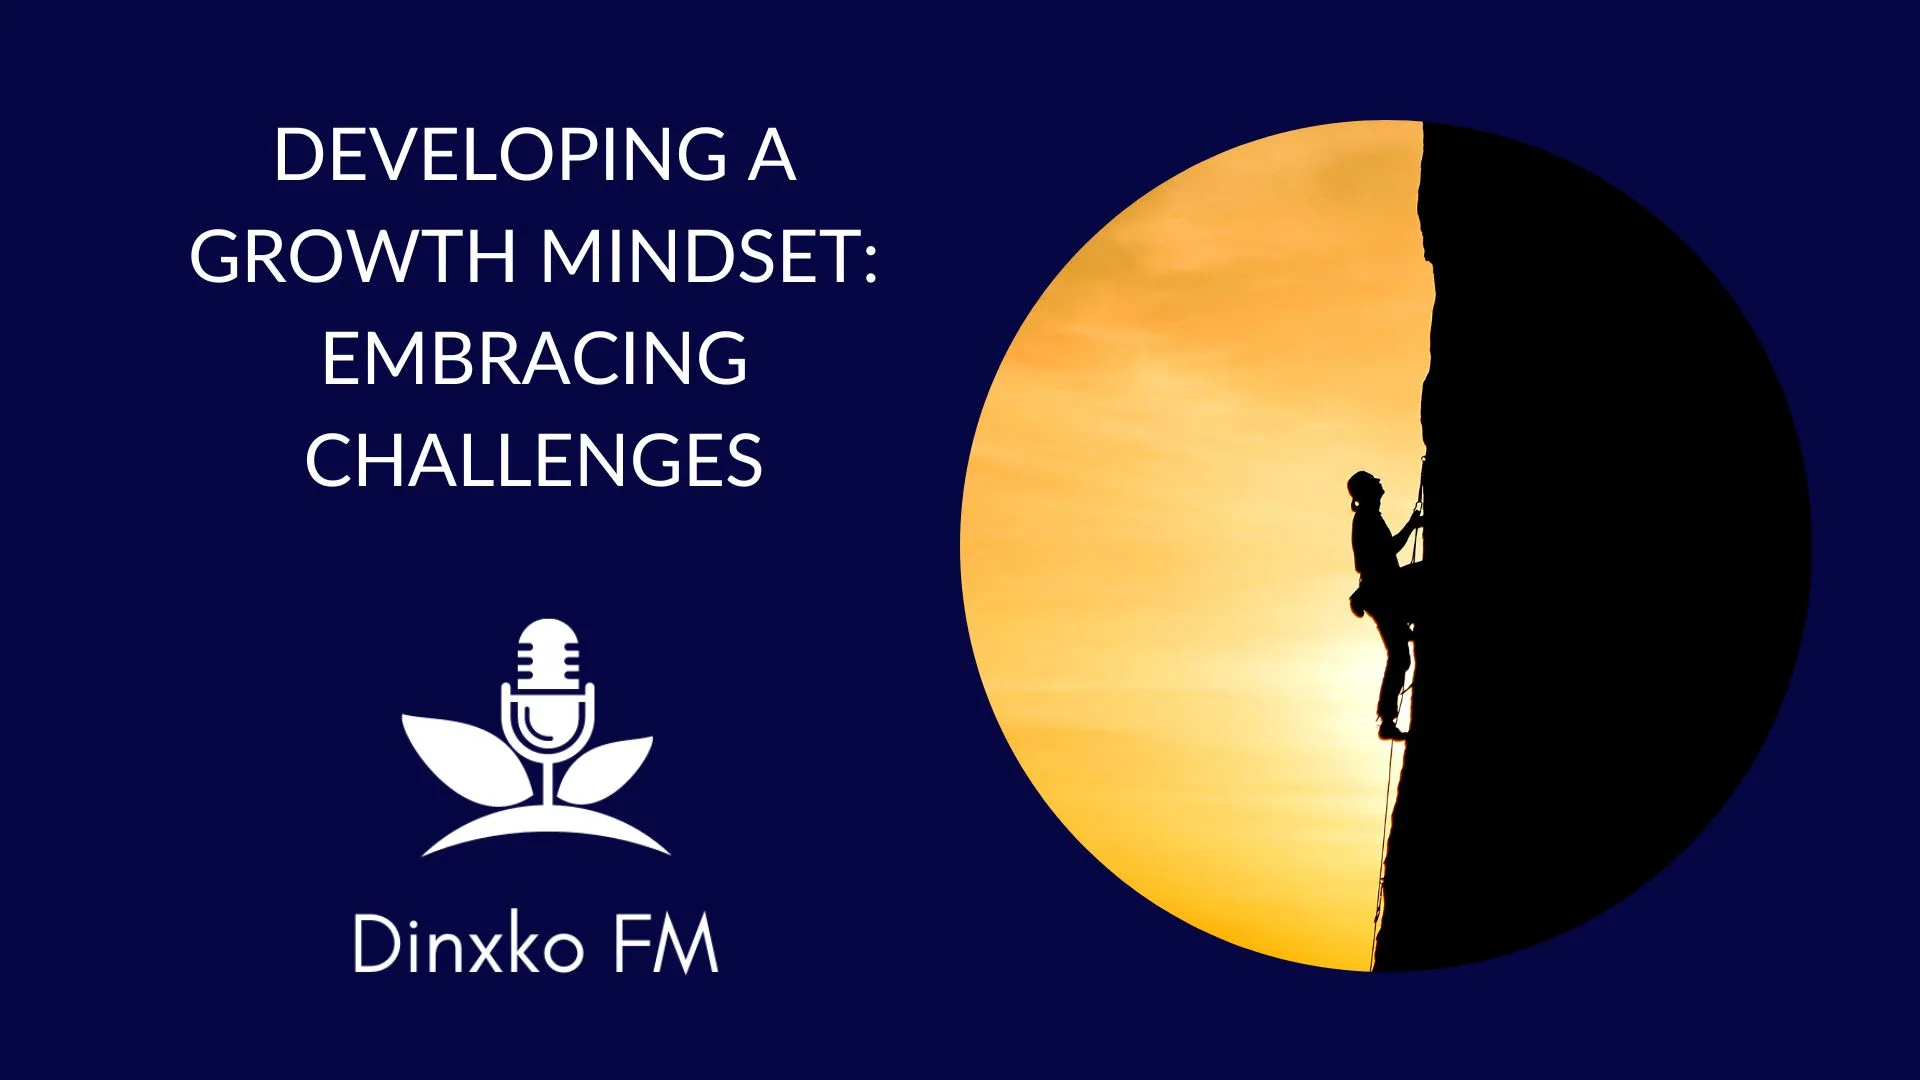 Developing a Growth Mindset: Embracing Challenges